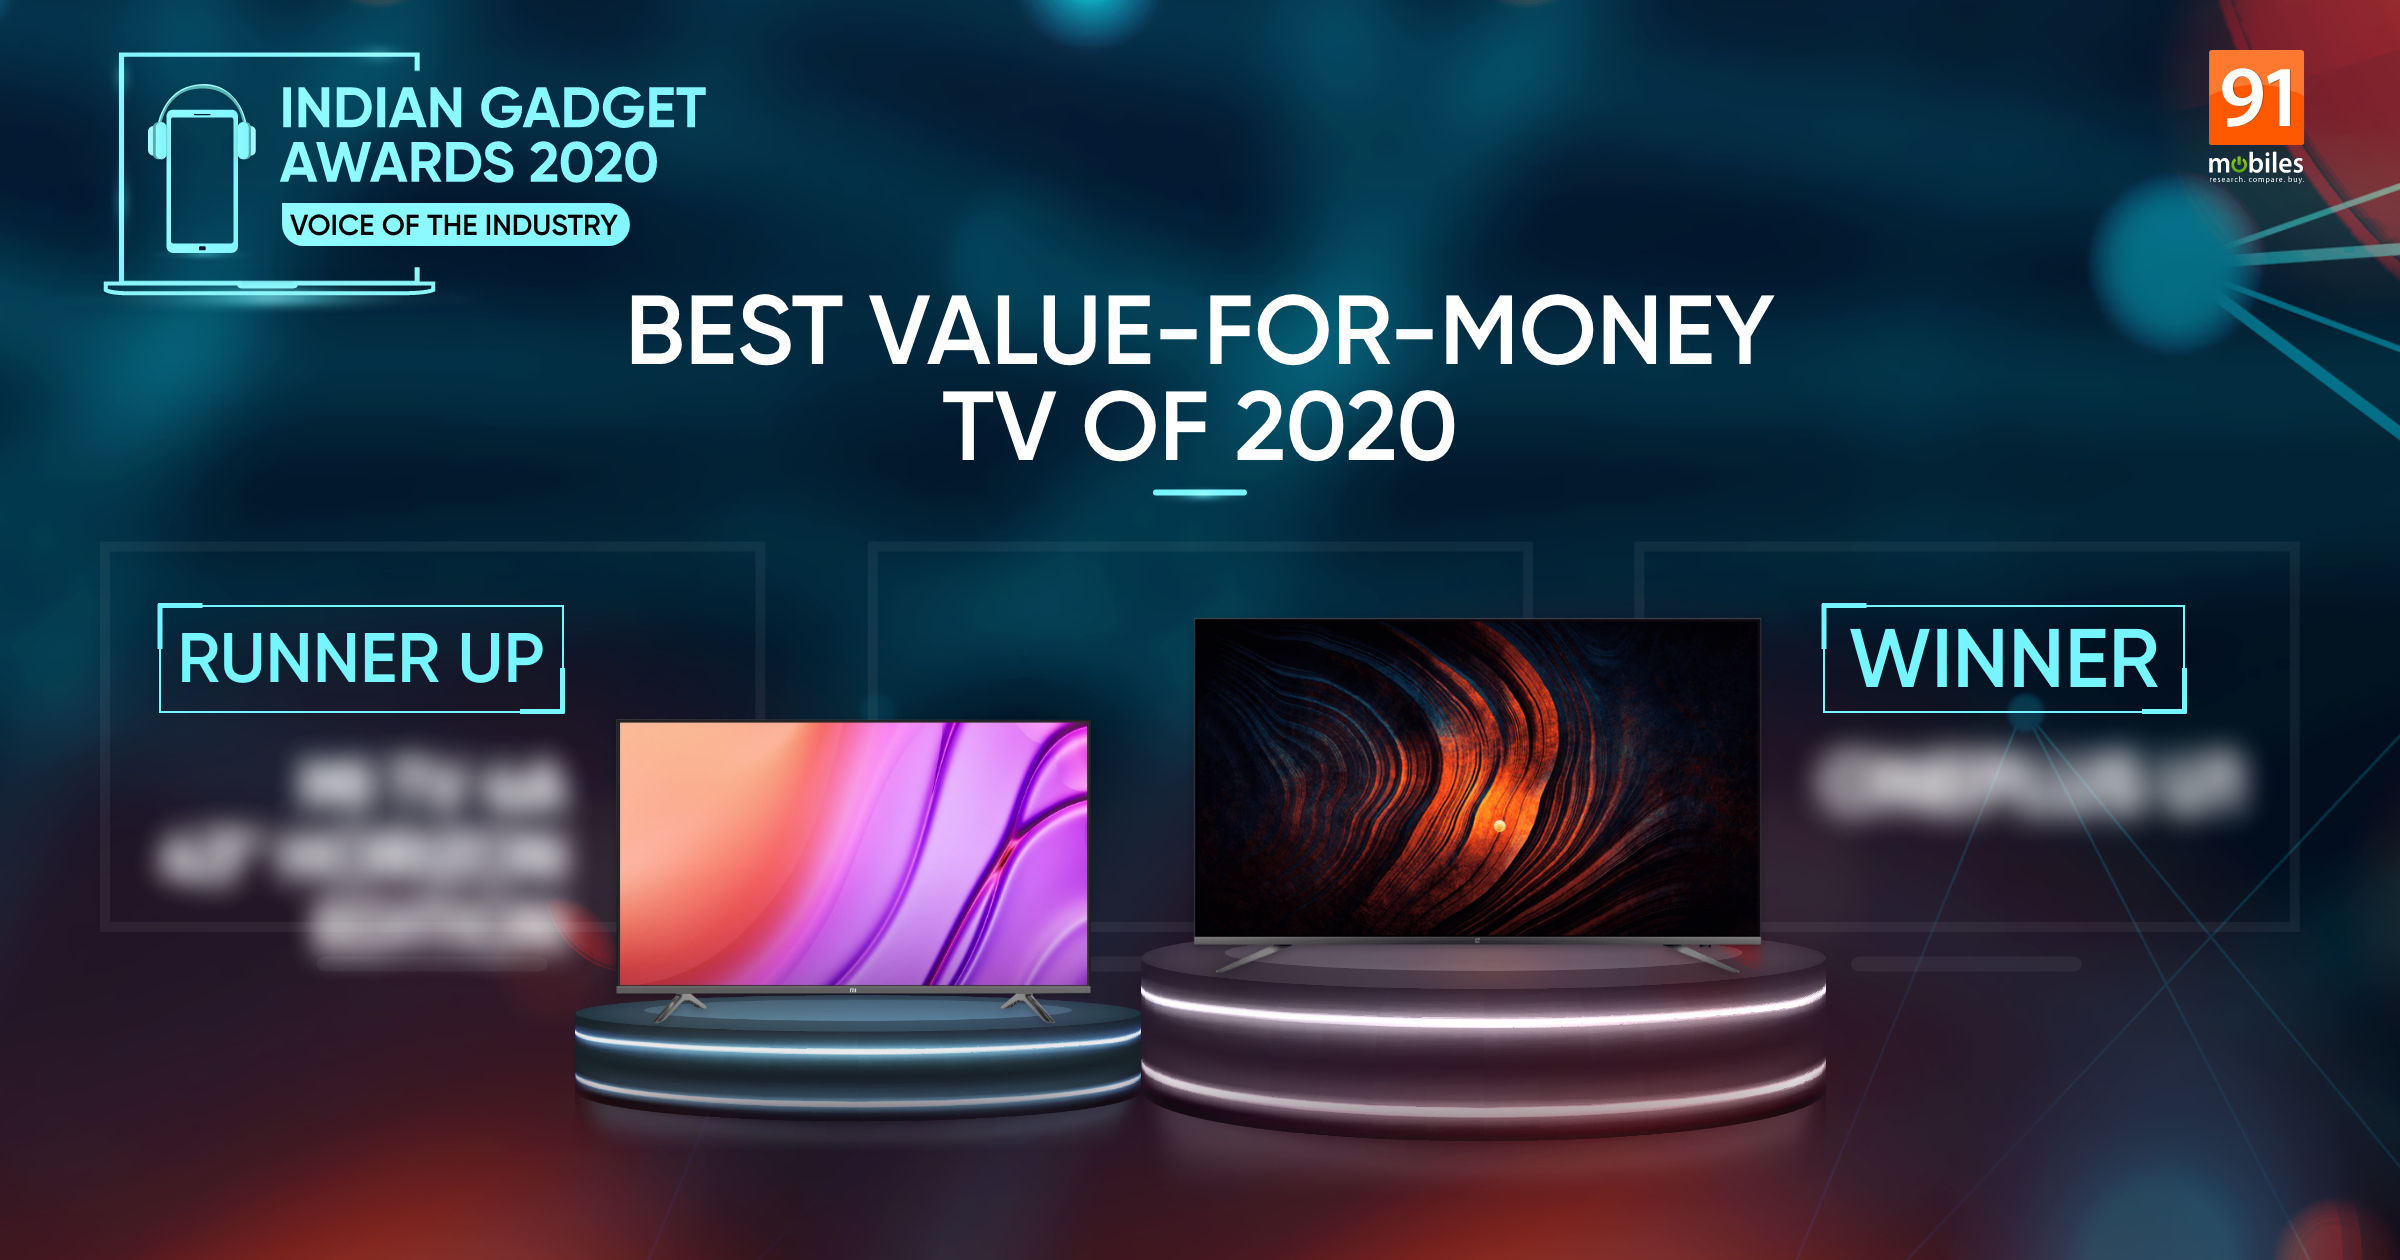 Indian Gadget Awards — Best Value-for-Money TV of 2020: OnePlus U1, Mi TV 4A Horizon Edition clash at the top